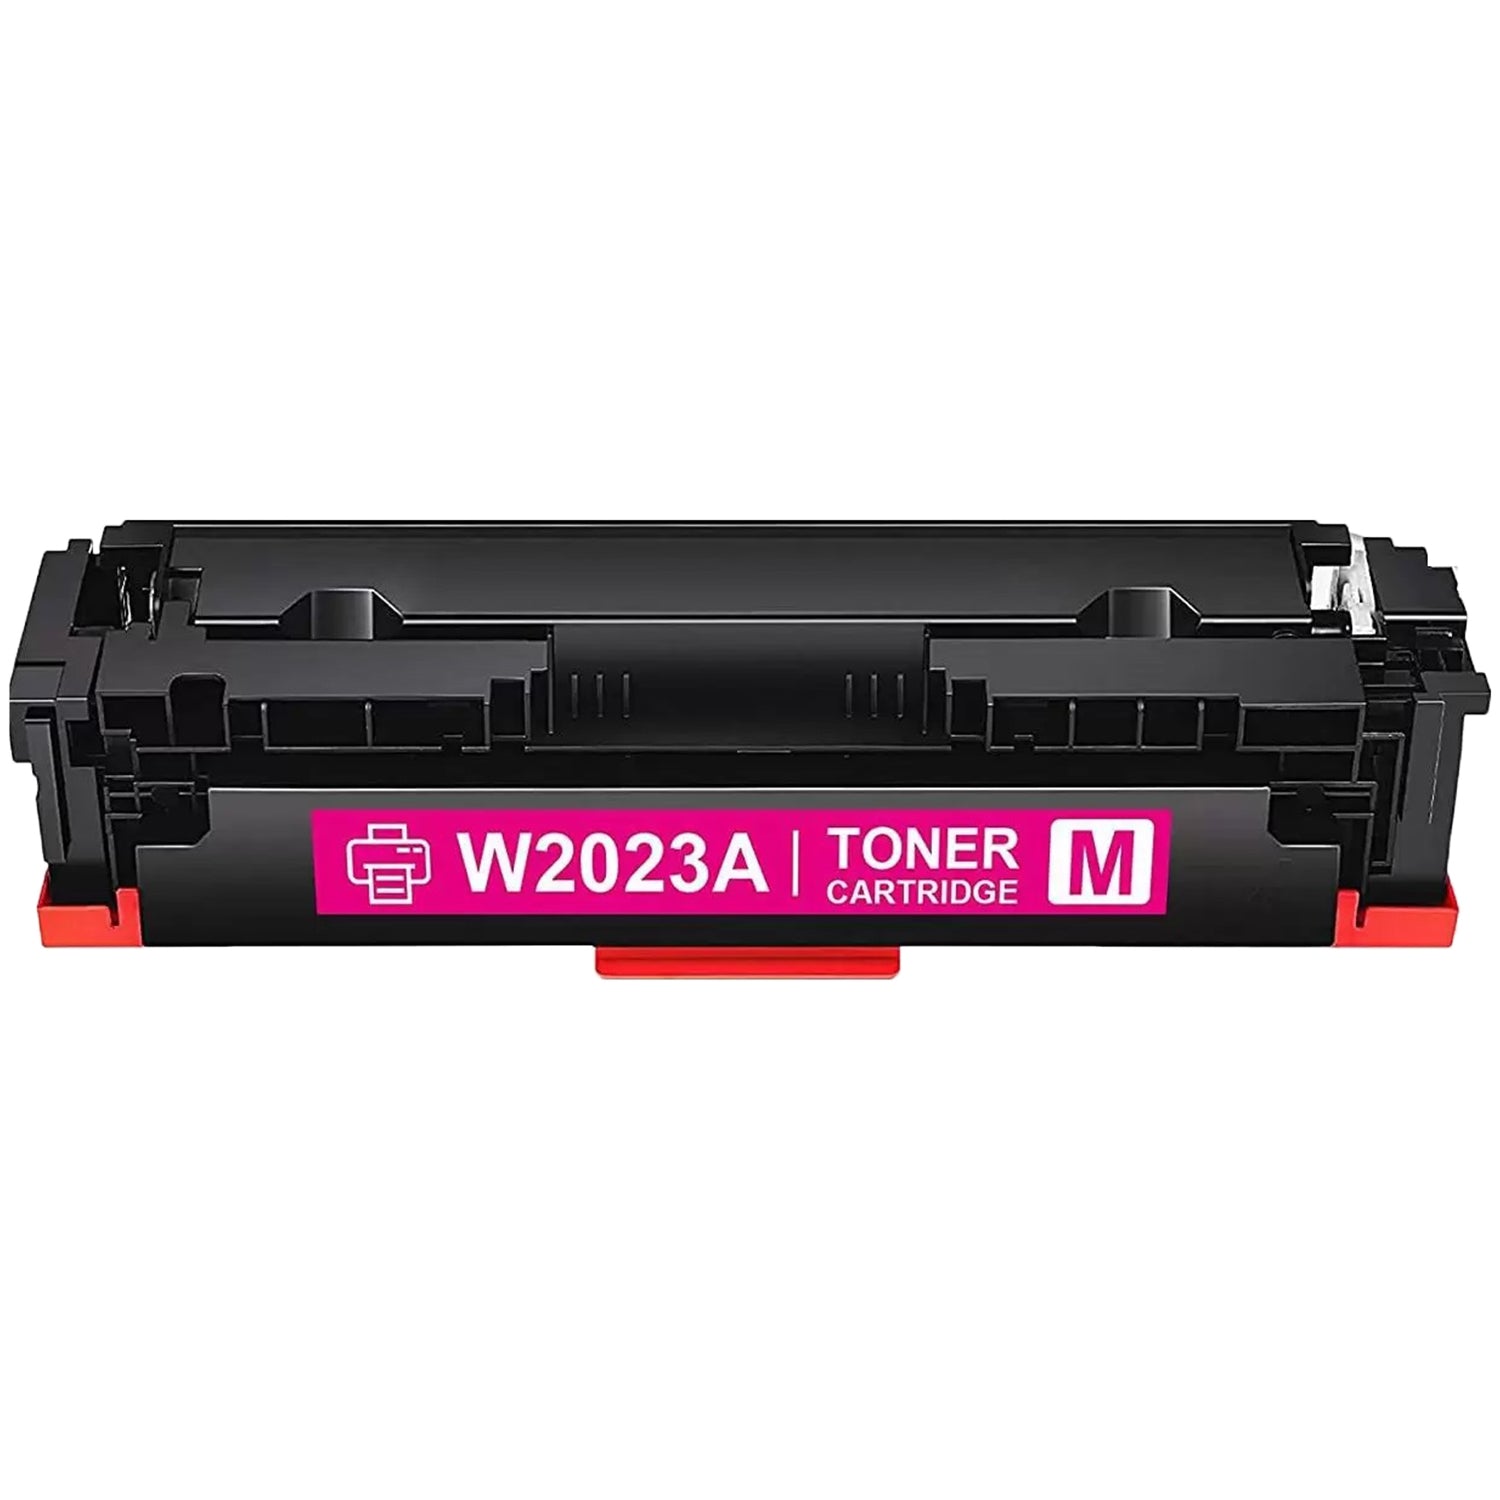 Absolute Toner Compatible HP W2023A / 414A Magenta Laserjet Toner Cartridge (With Chip) By Absolute Toner HP Toner Cartridges